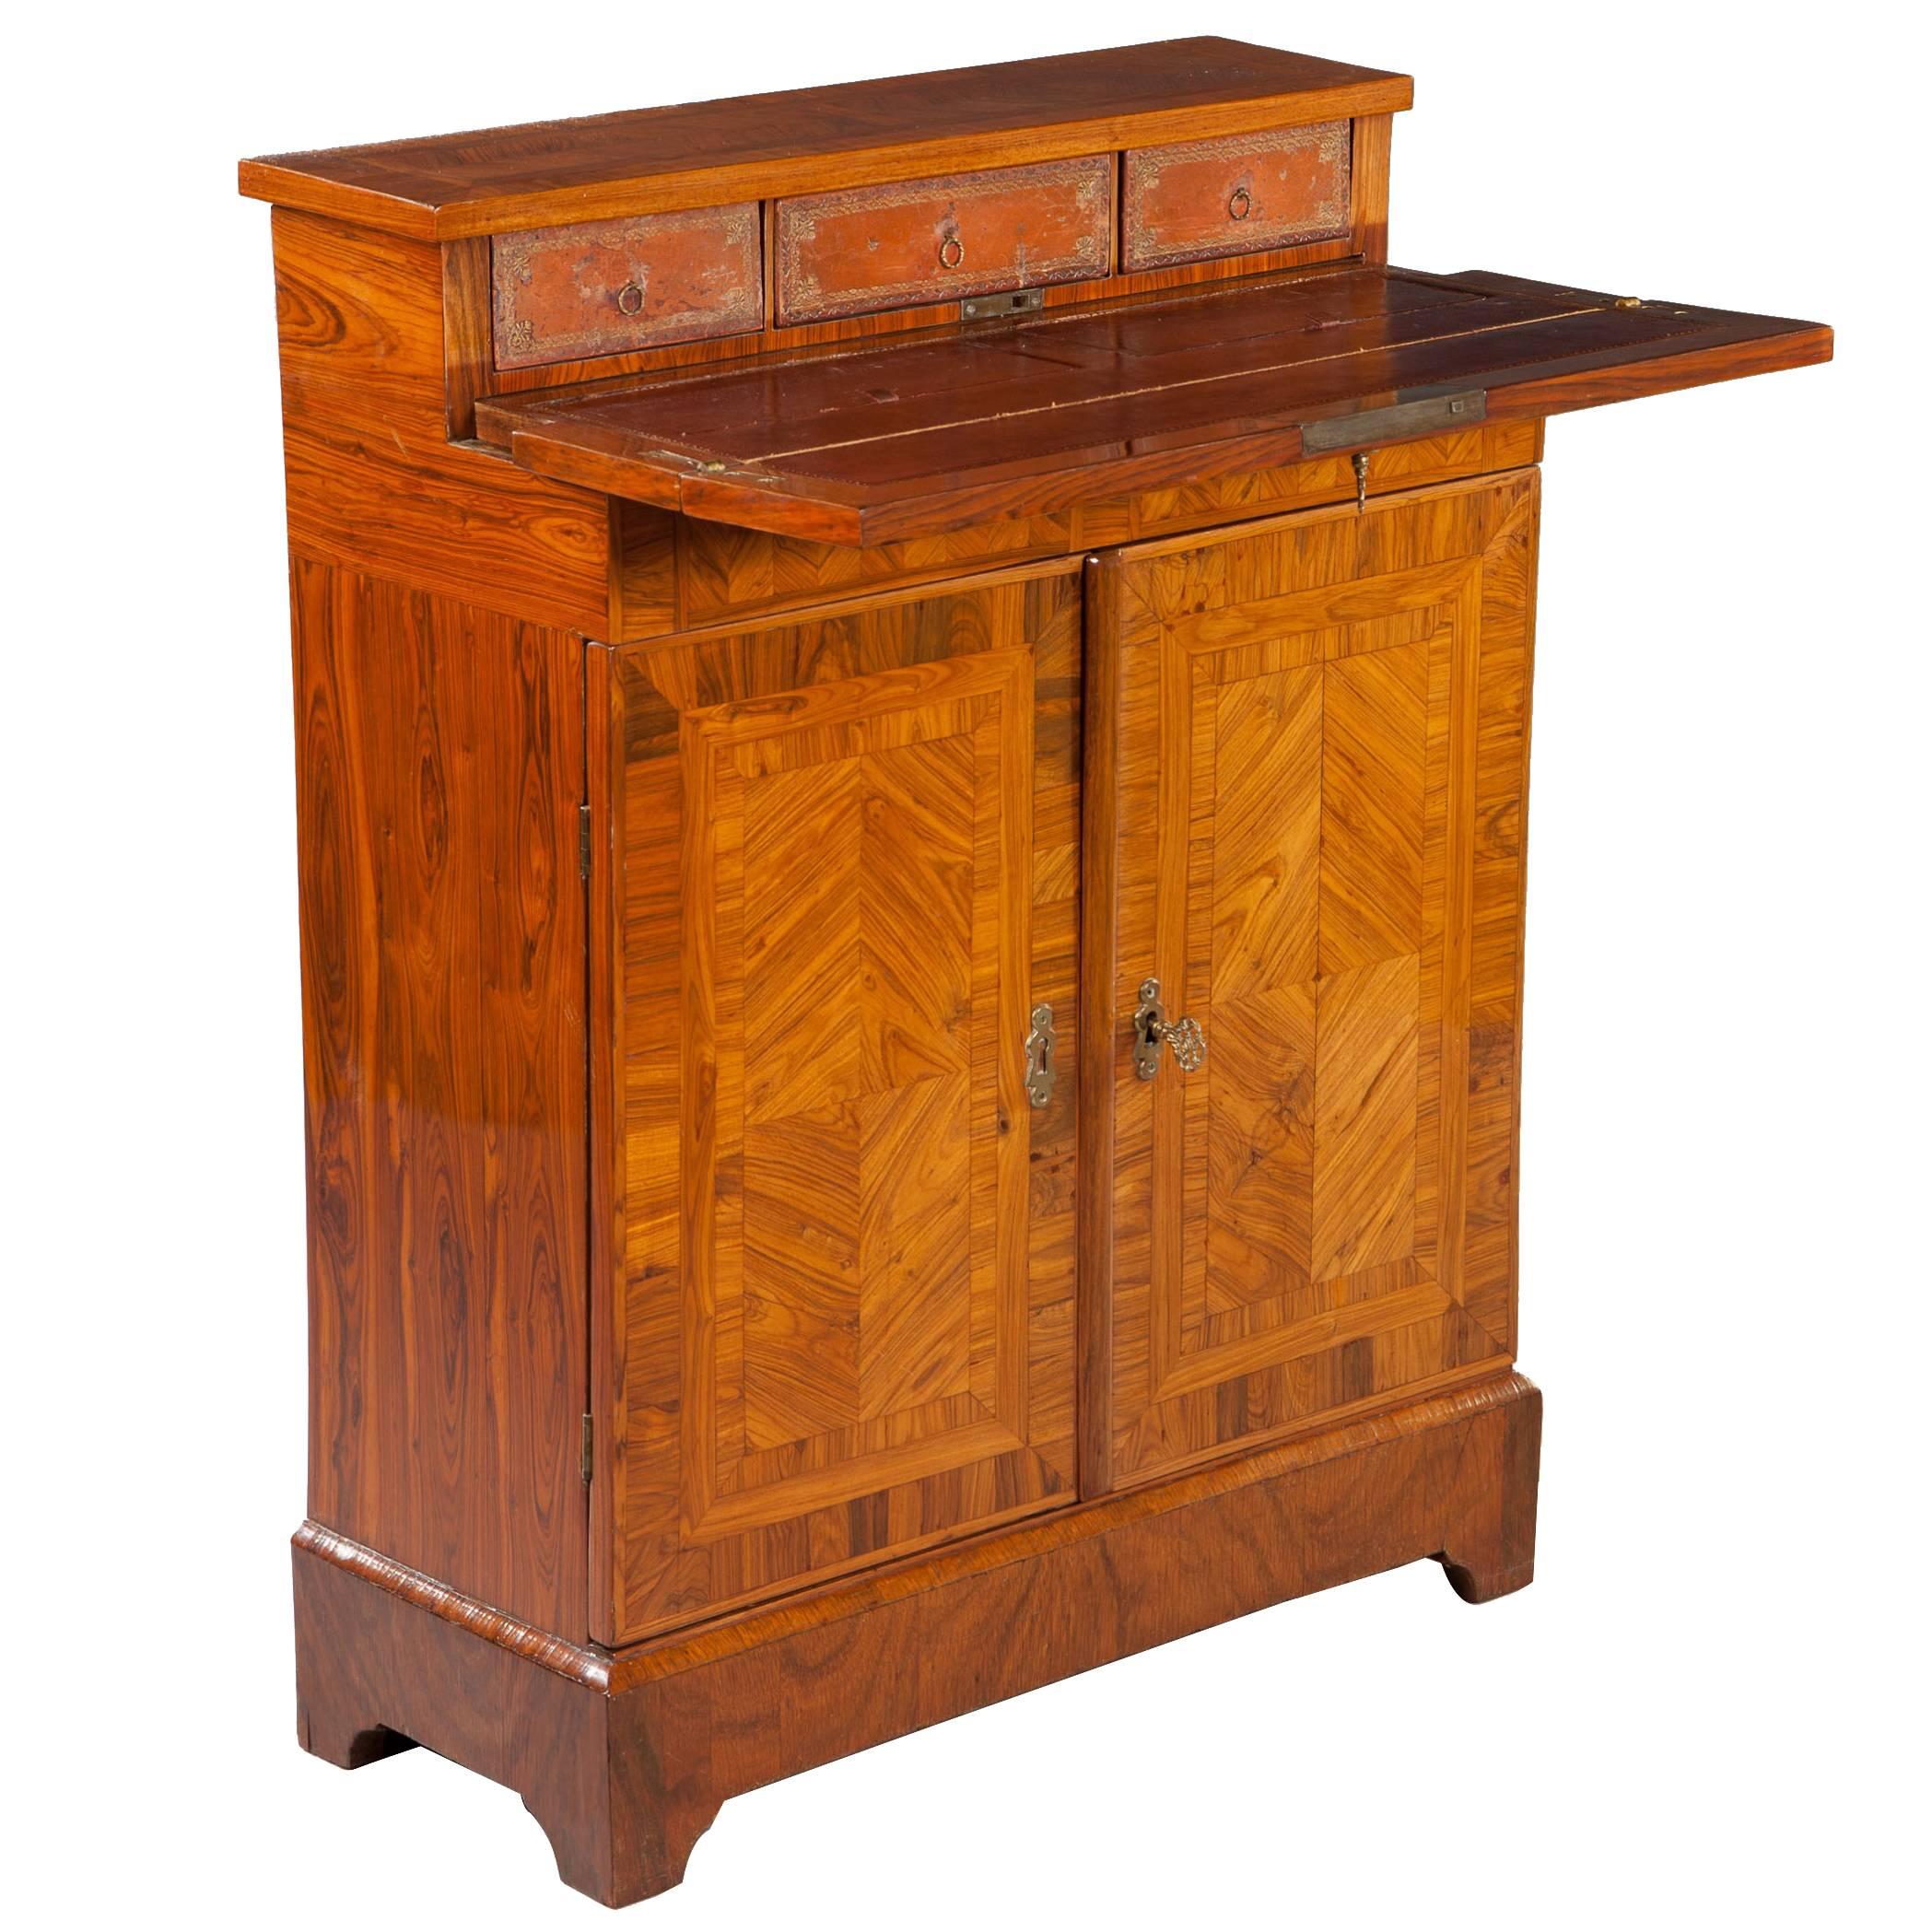 Parquetry Kingwood Secretaire Cabinet Cupboard - shallow narrow depth